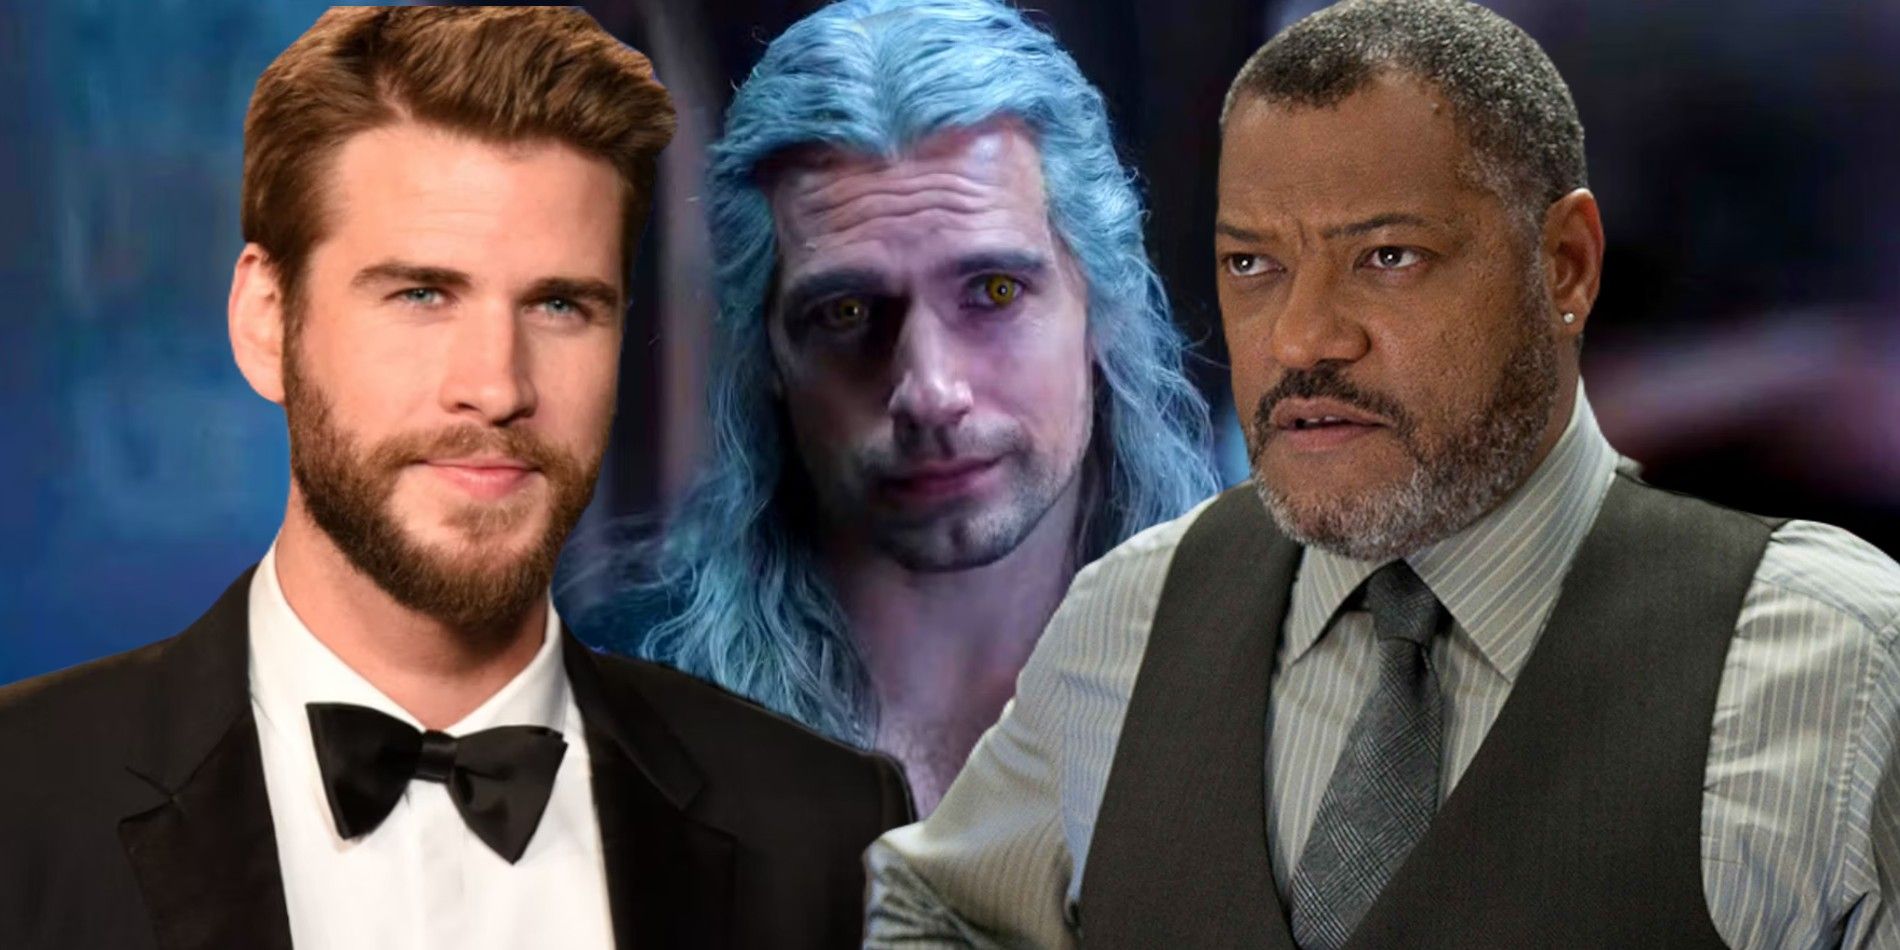 Liam Hemsworth, Henry Cavill as Geralt of Rivia in The Witcher, and Laurence Fishburne as Perry White in Man of Steel.